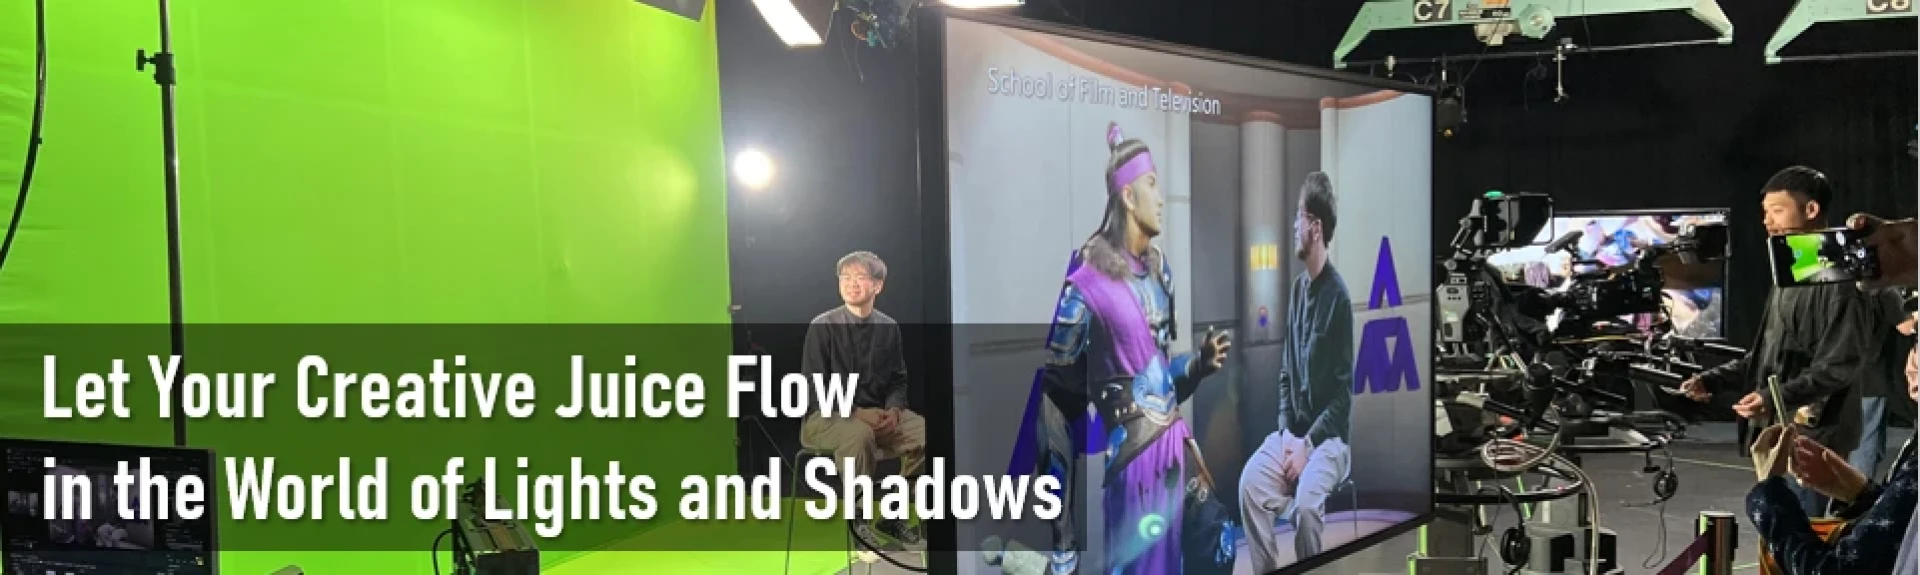 Let Your Creative Juice Flow in the World of Lights and Shadows